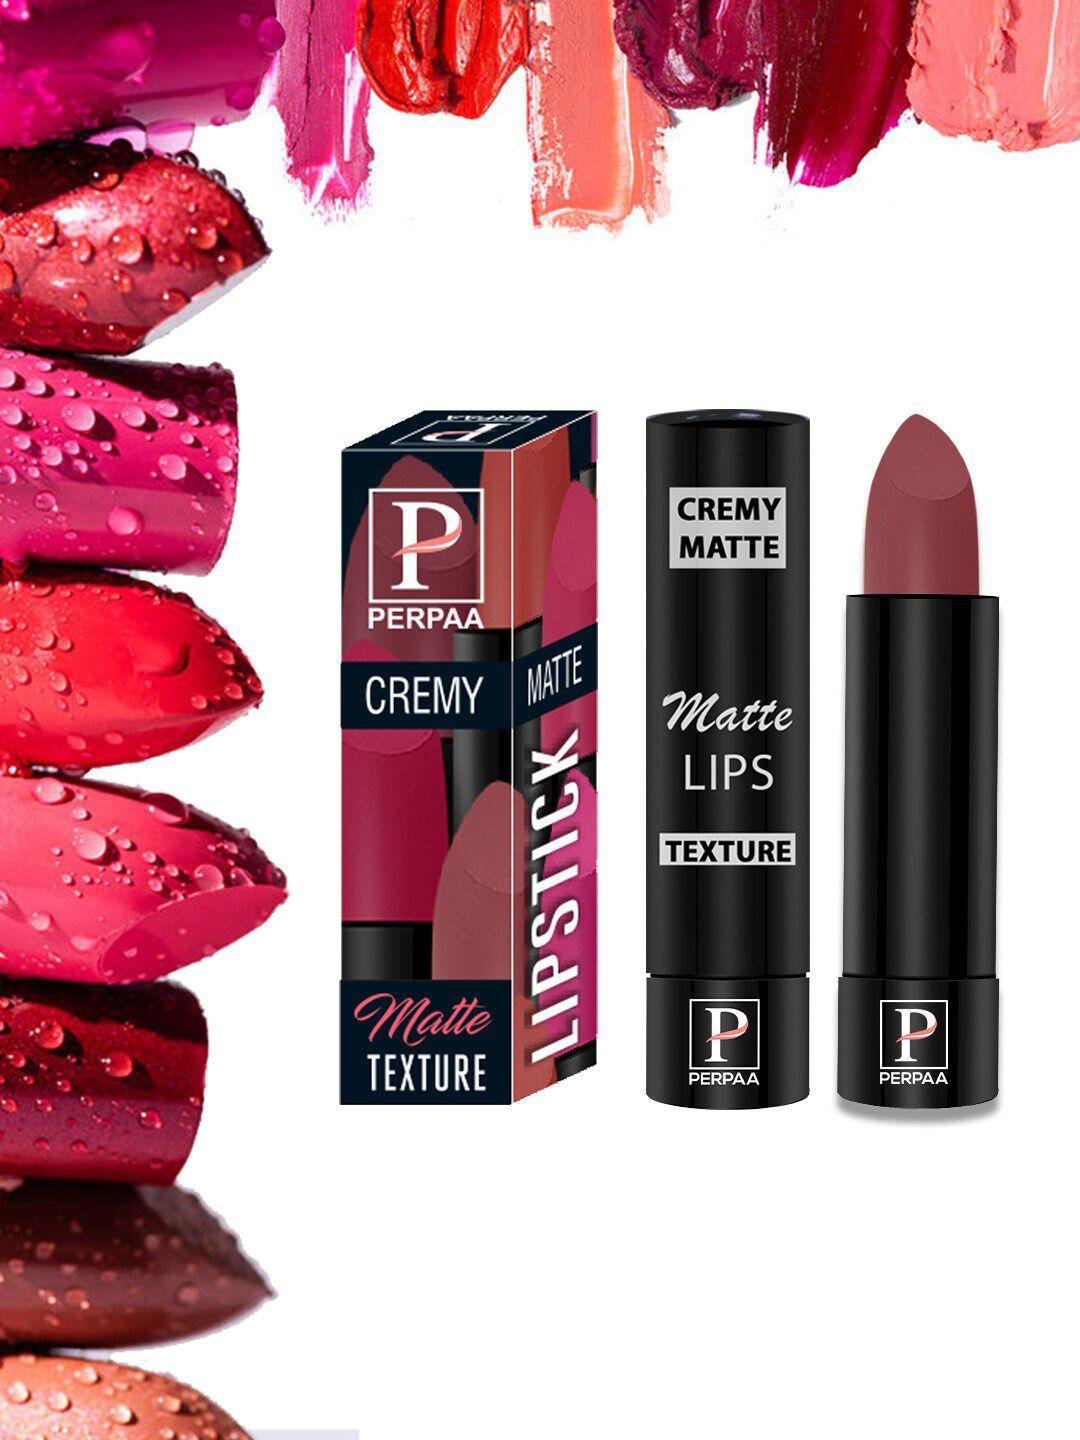 perpaa cremy long lasting matte texture bullet lipstick 3.5 g - brick red 110